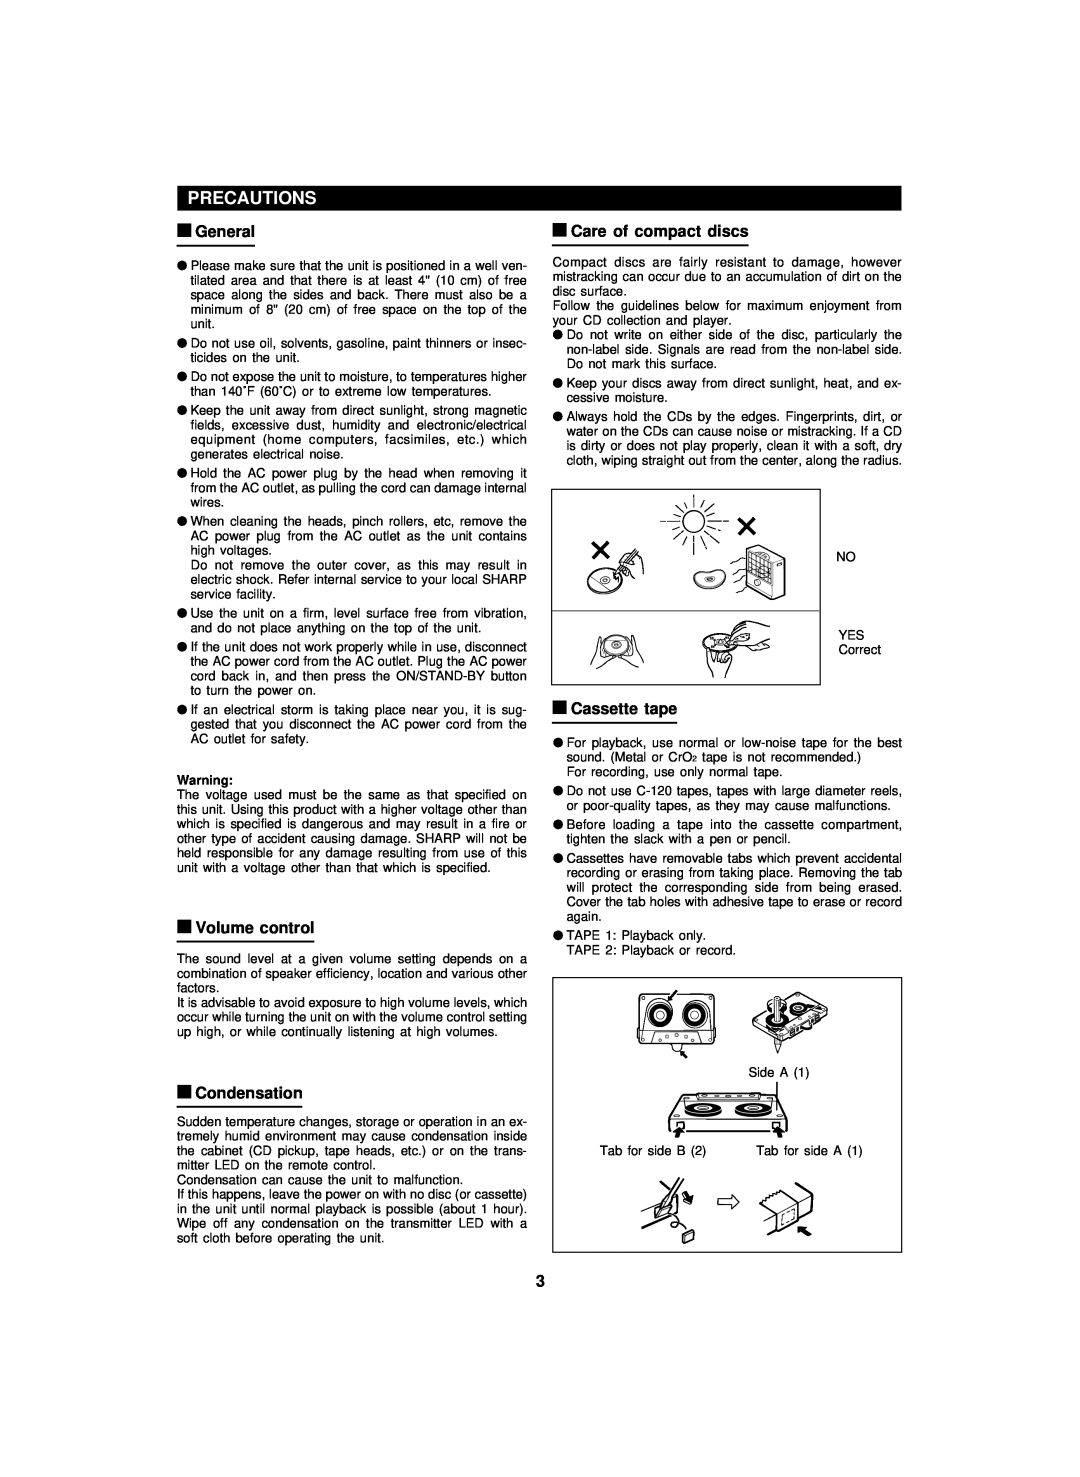 Sharp CD-PC3500 operation manual Precautions, General, Volume control, Condensation, Care of compact discs, Cassette tape 